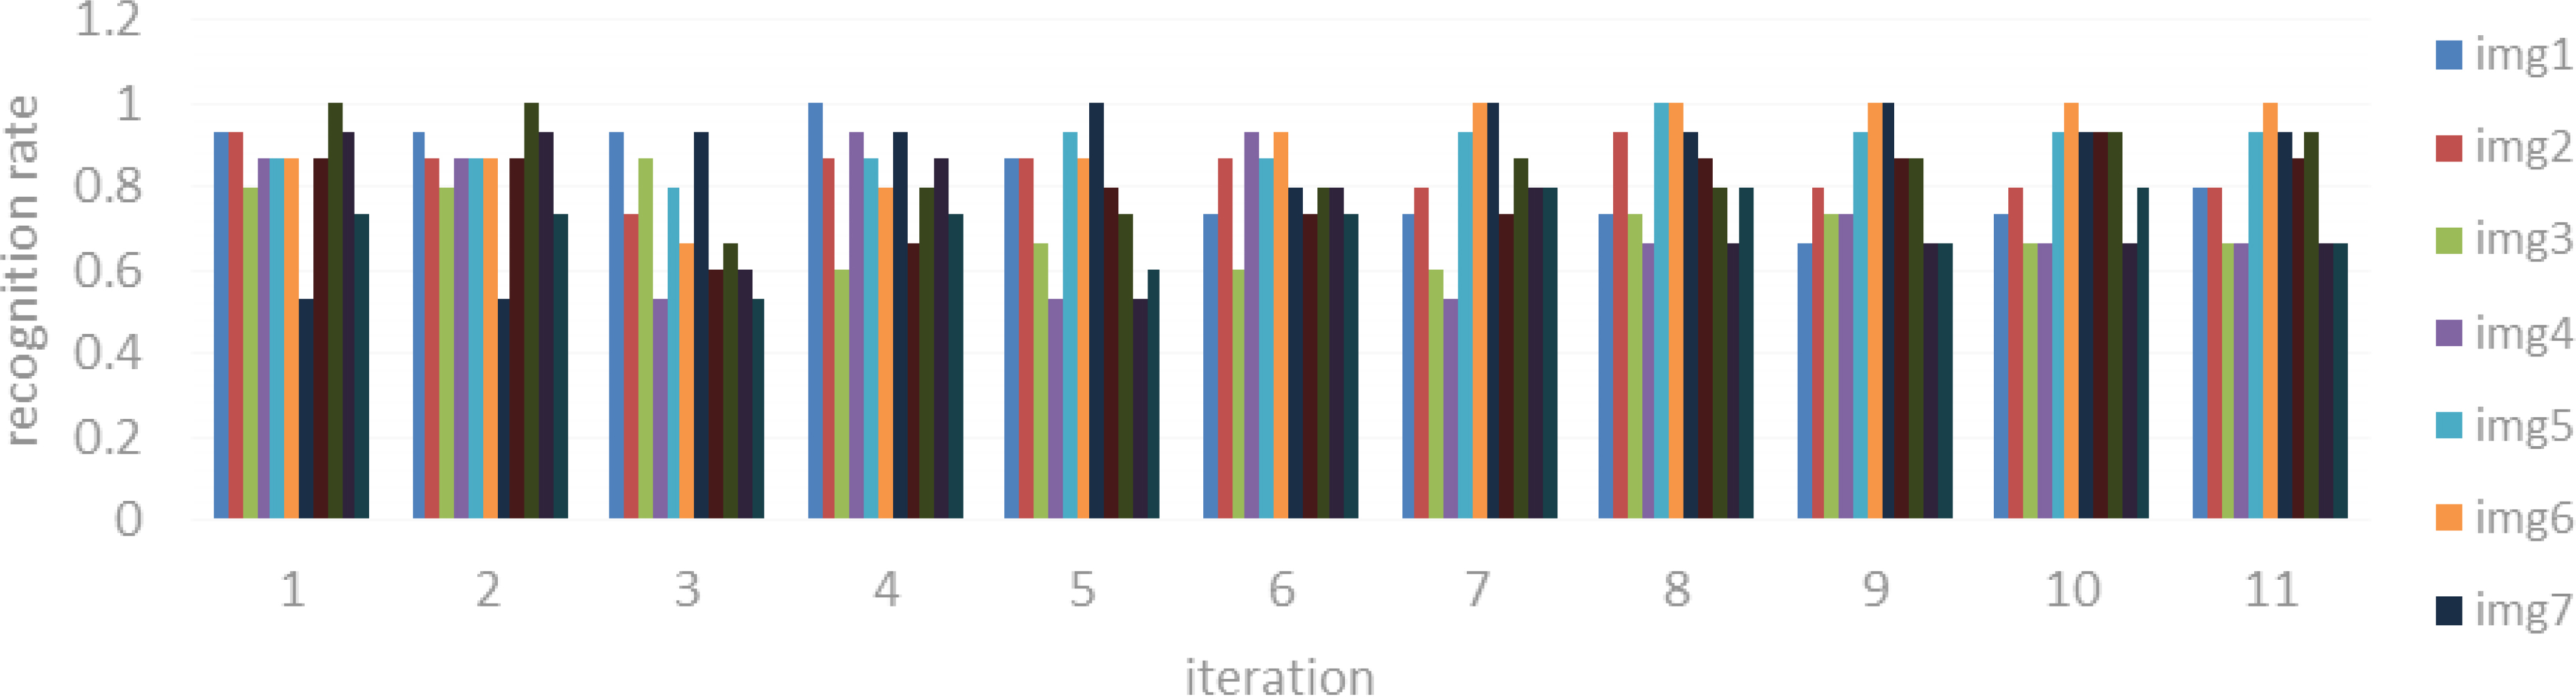 Accuracy rates of different number of iterations on Yale database.